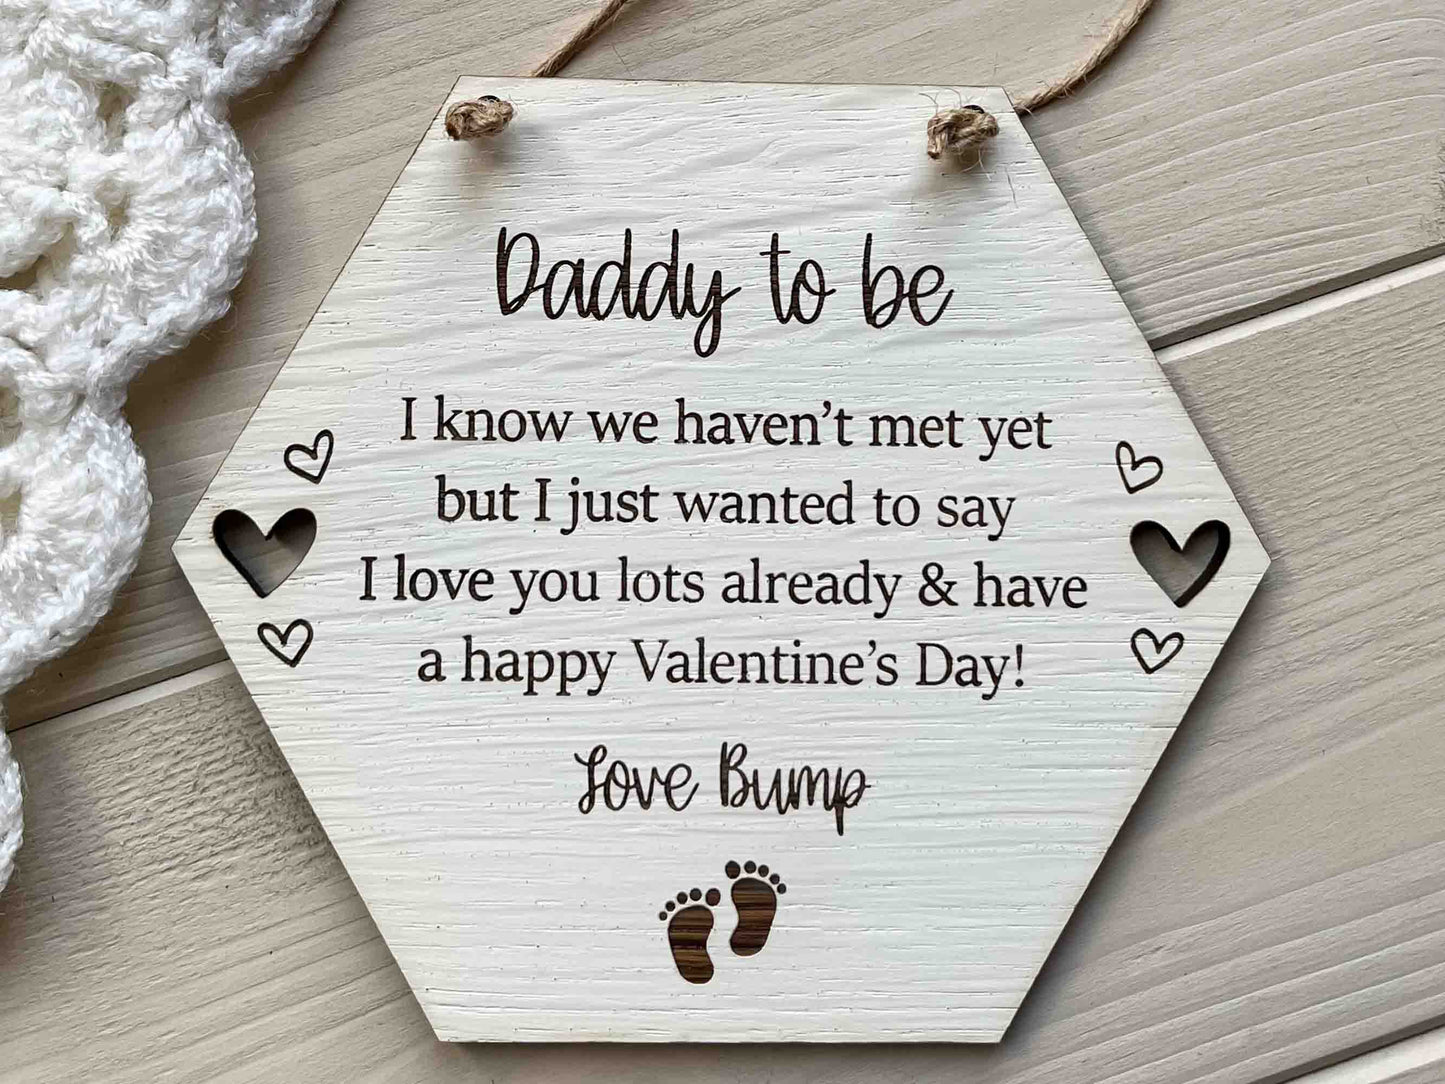 Daddy to be on valentines gift